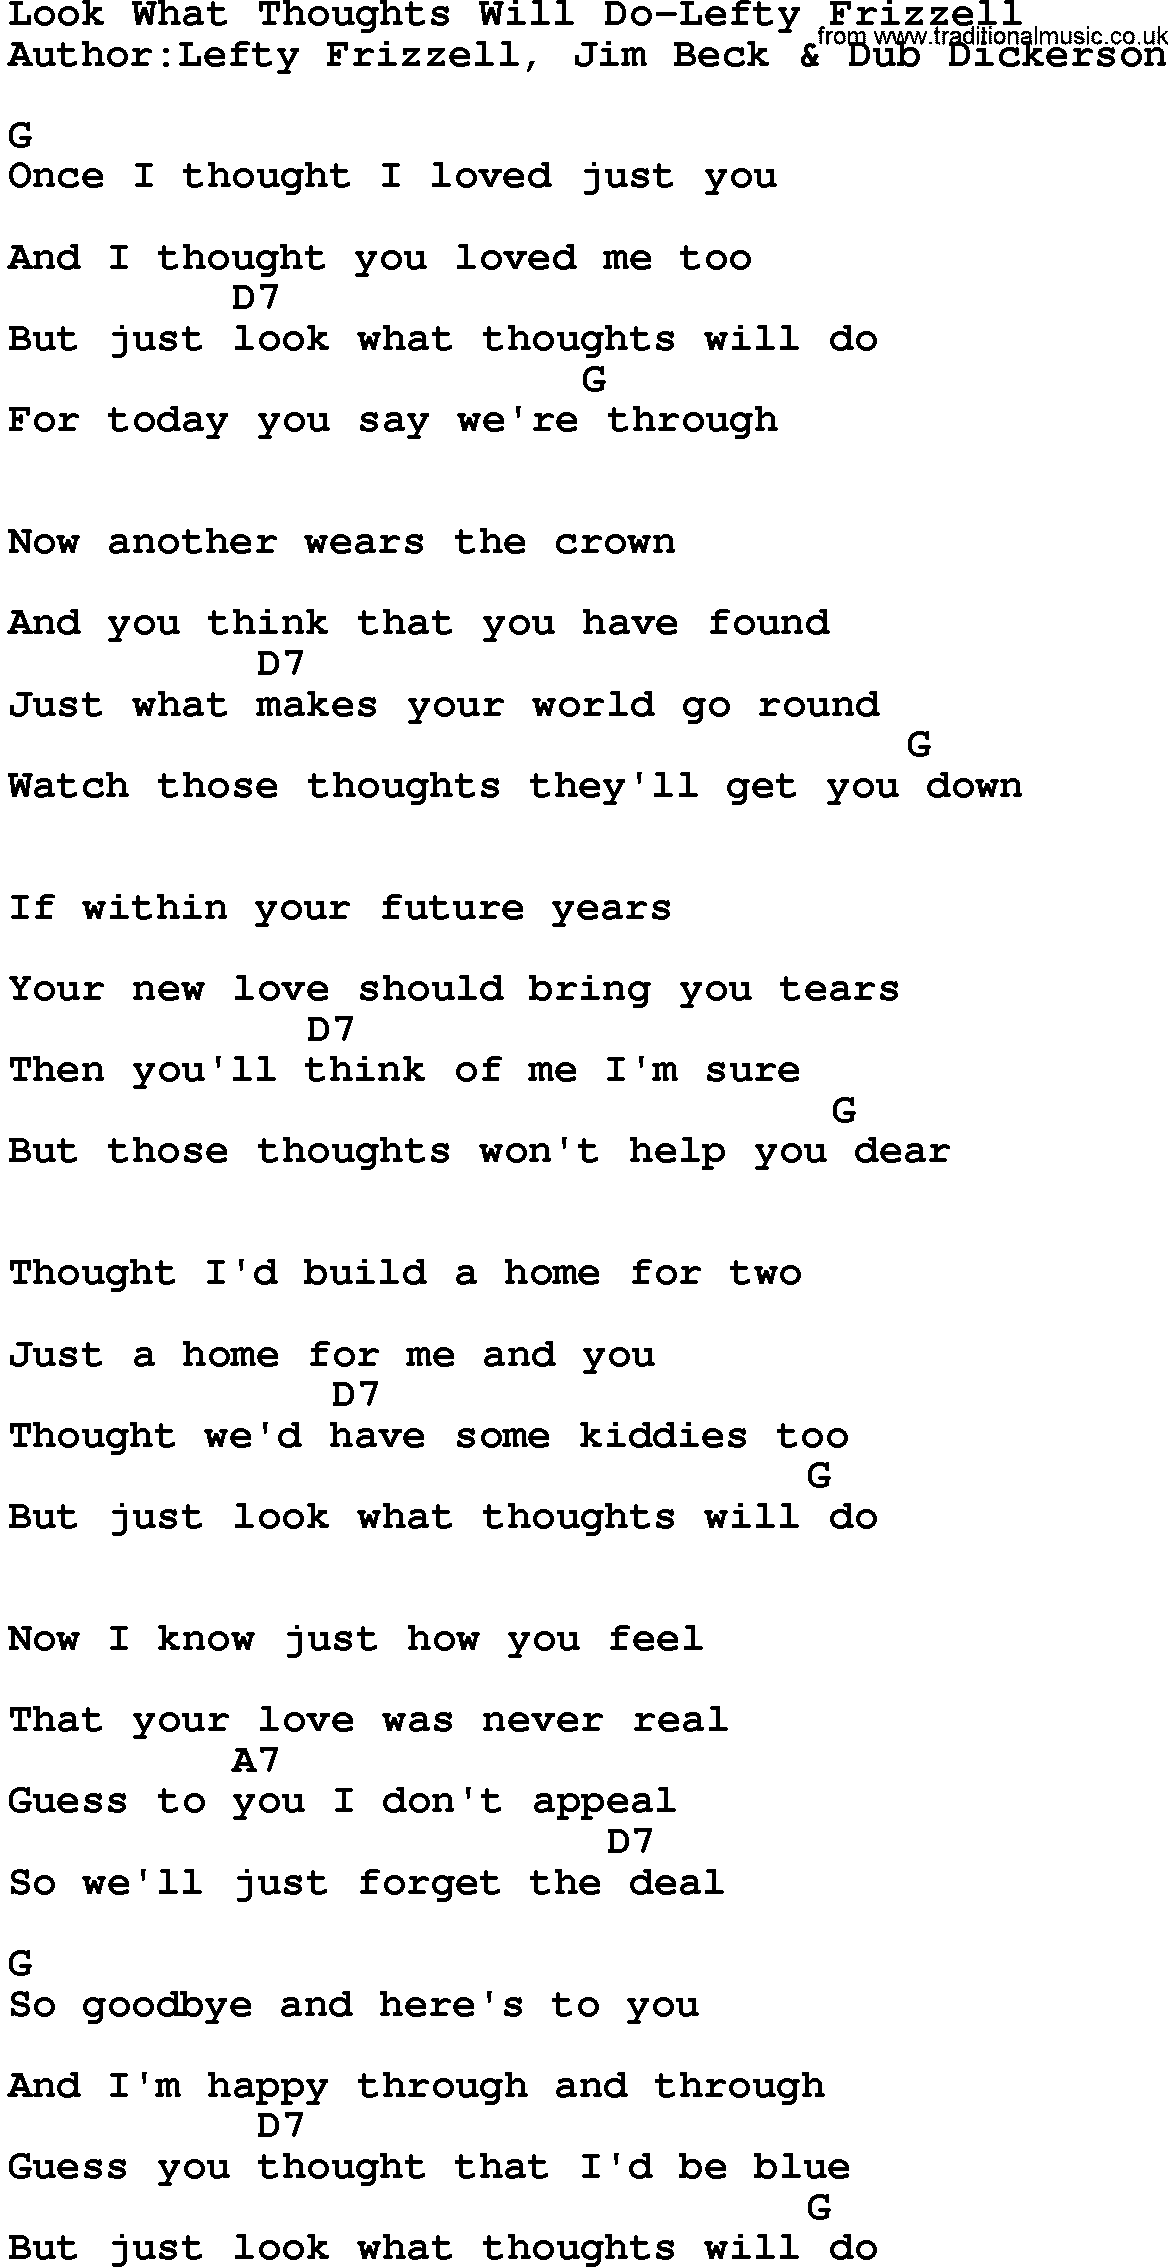 Country music song: Look What Thoughts Will Do-Lefty Frizzell lyrics and chords